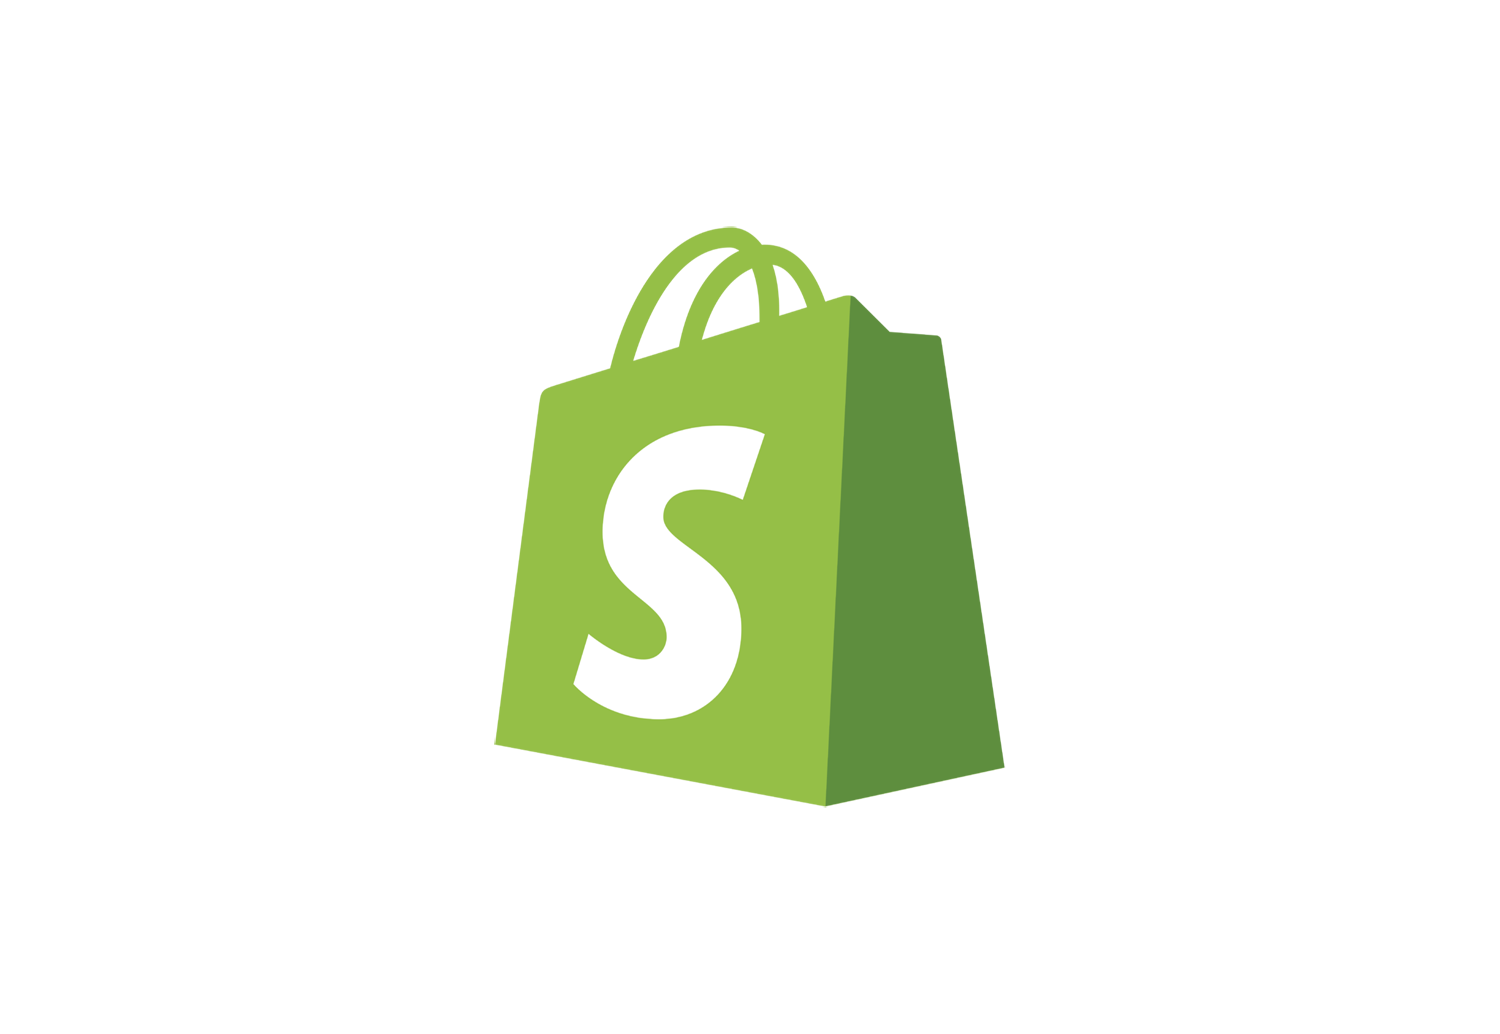 Shopify Png Cliparts | Pngwav